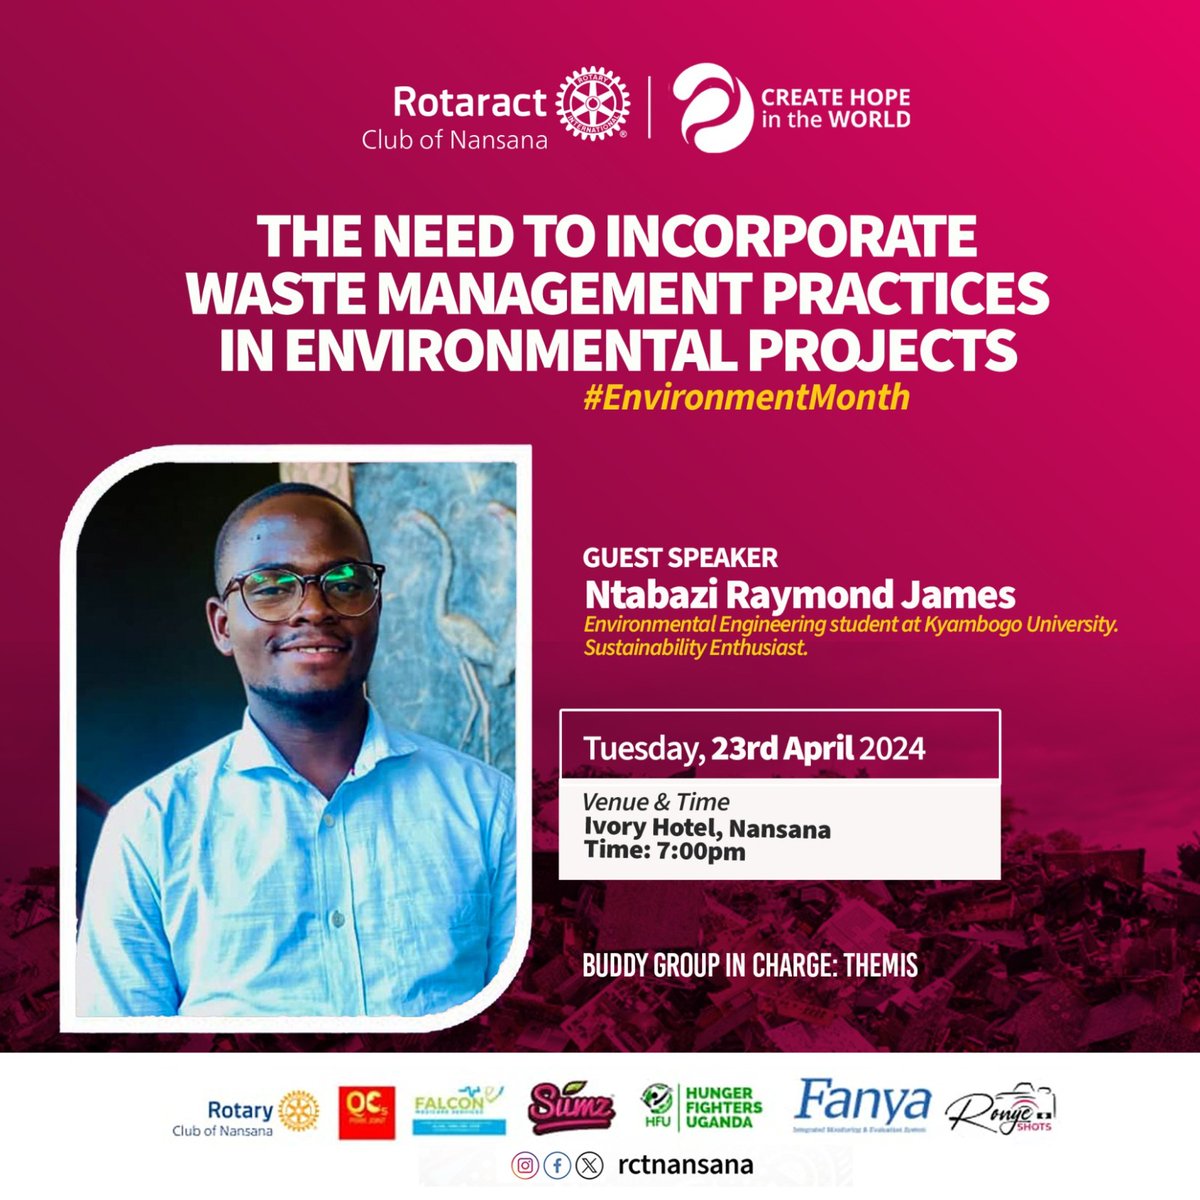 Thrilled for the opportunity to speak at the Rotaract Club of Nansana tonight.

Together, let's empower communities, drive sustainability, and ignite change.
#Rotaract #Sustainability #CommunityImpact #wastemanagement